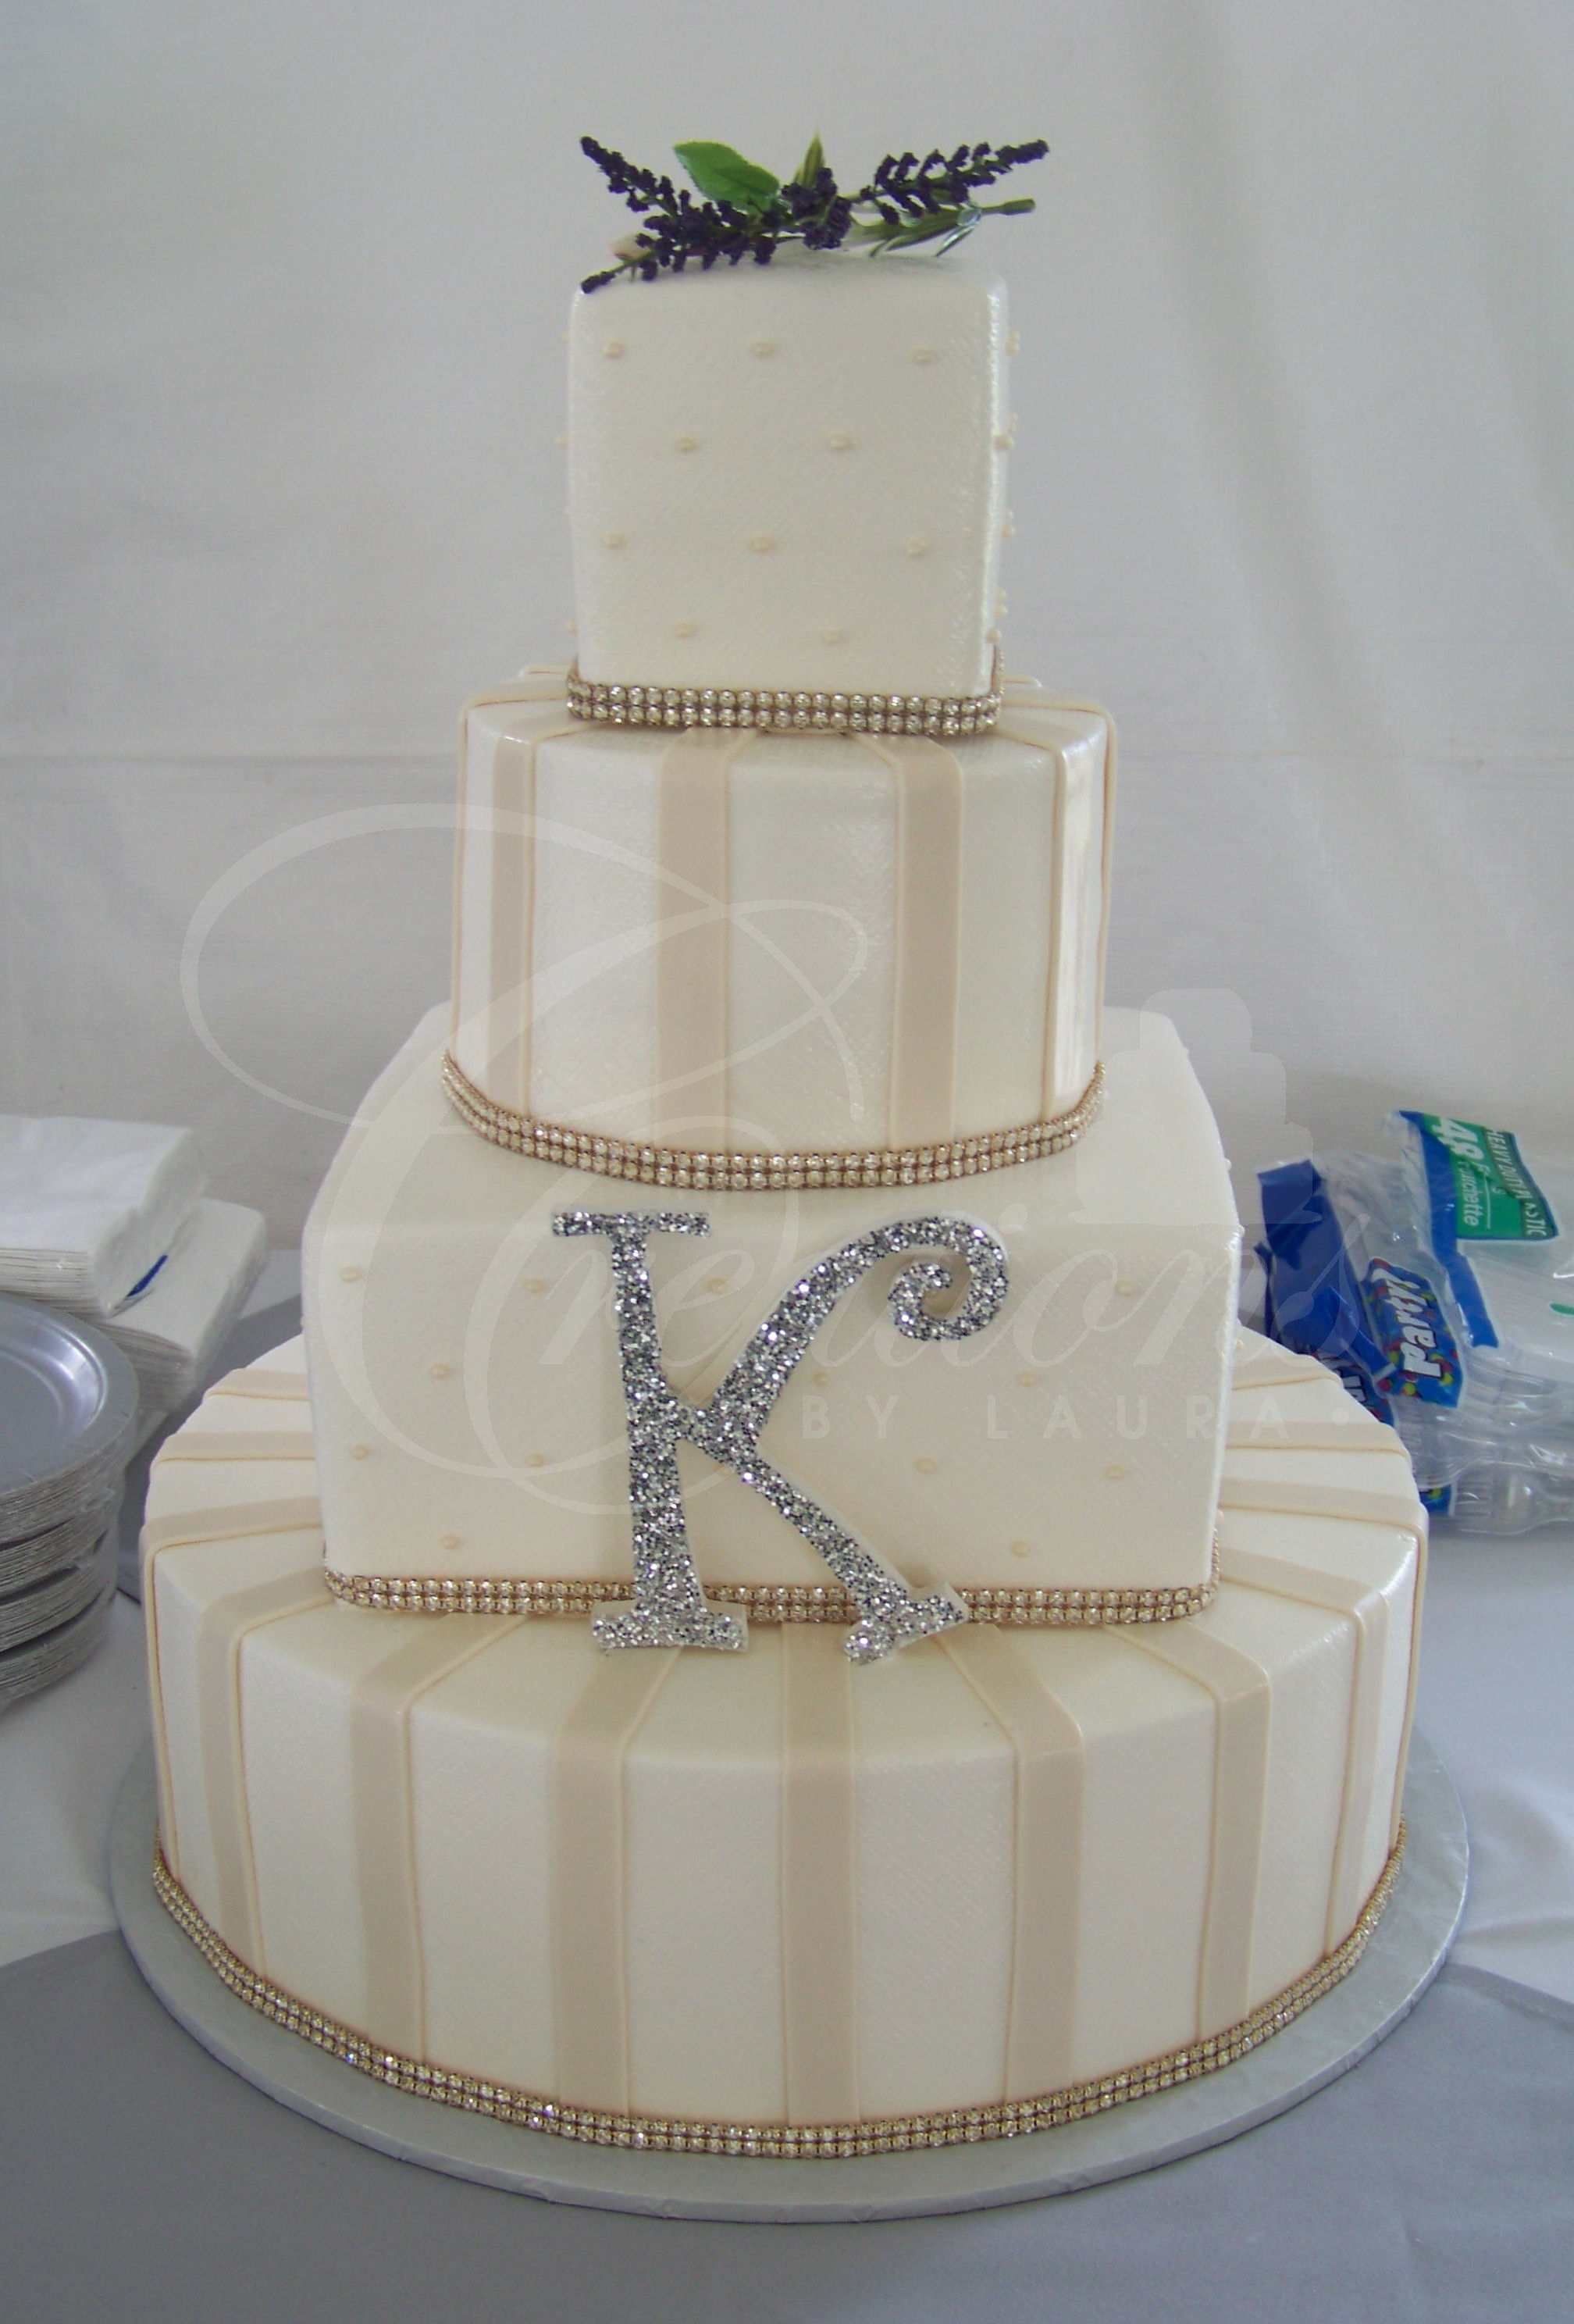 Ivory Wedding Cakes with Pearls